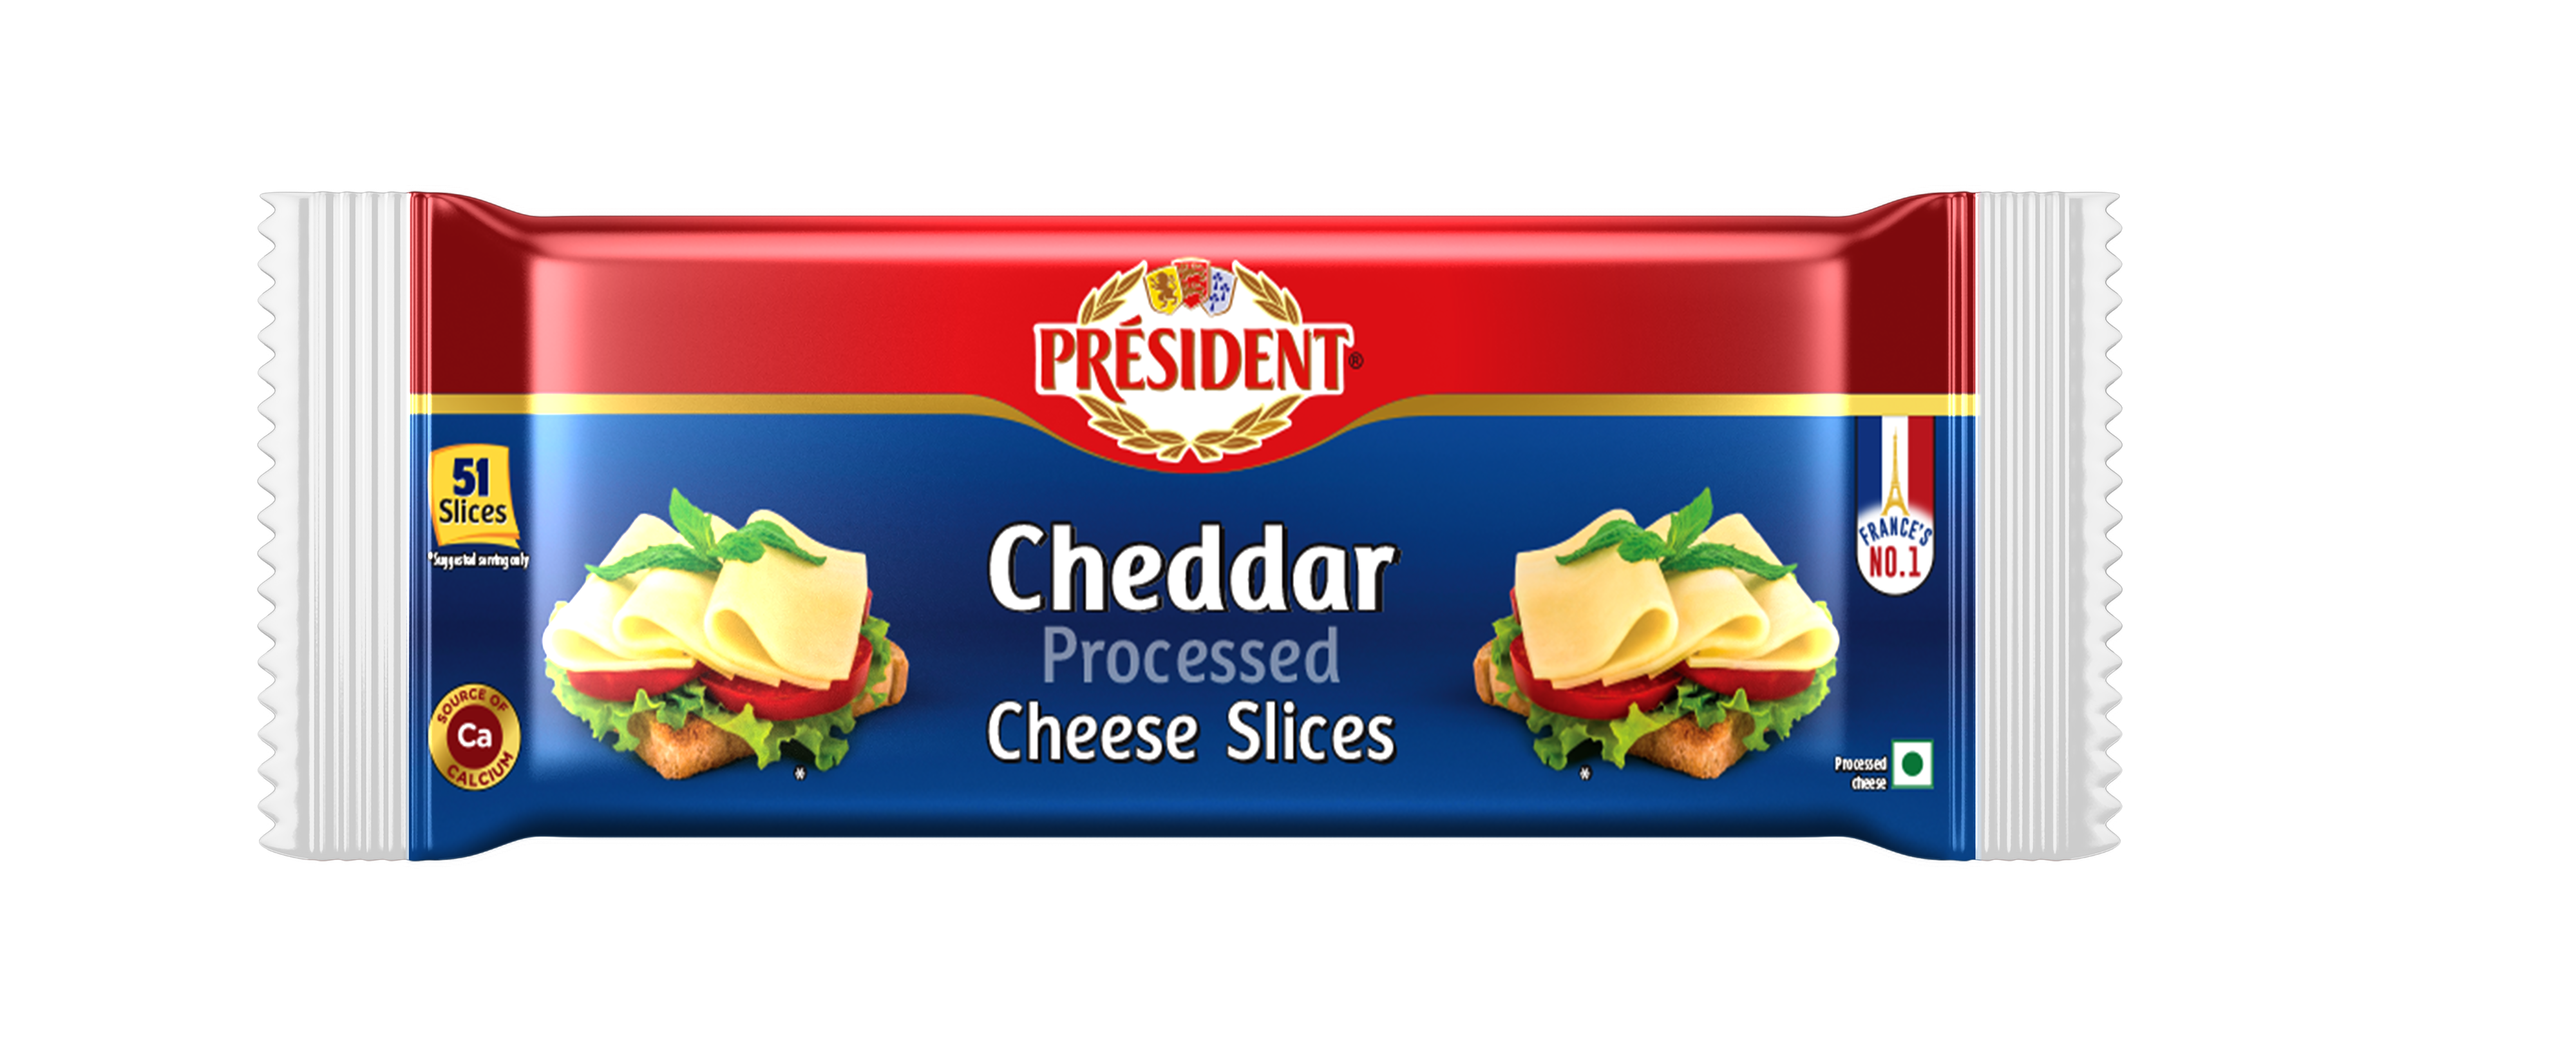 Président ® Cheddar Processed Cheese Slices